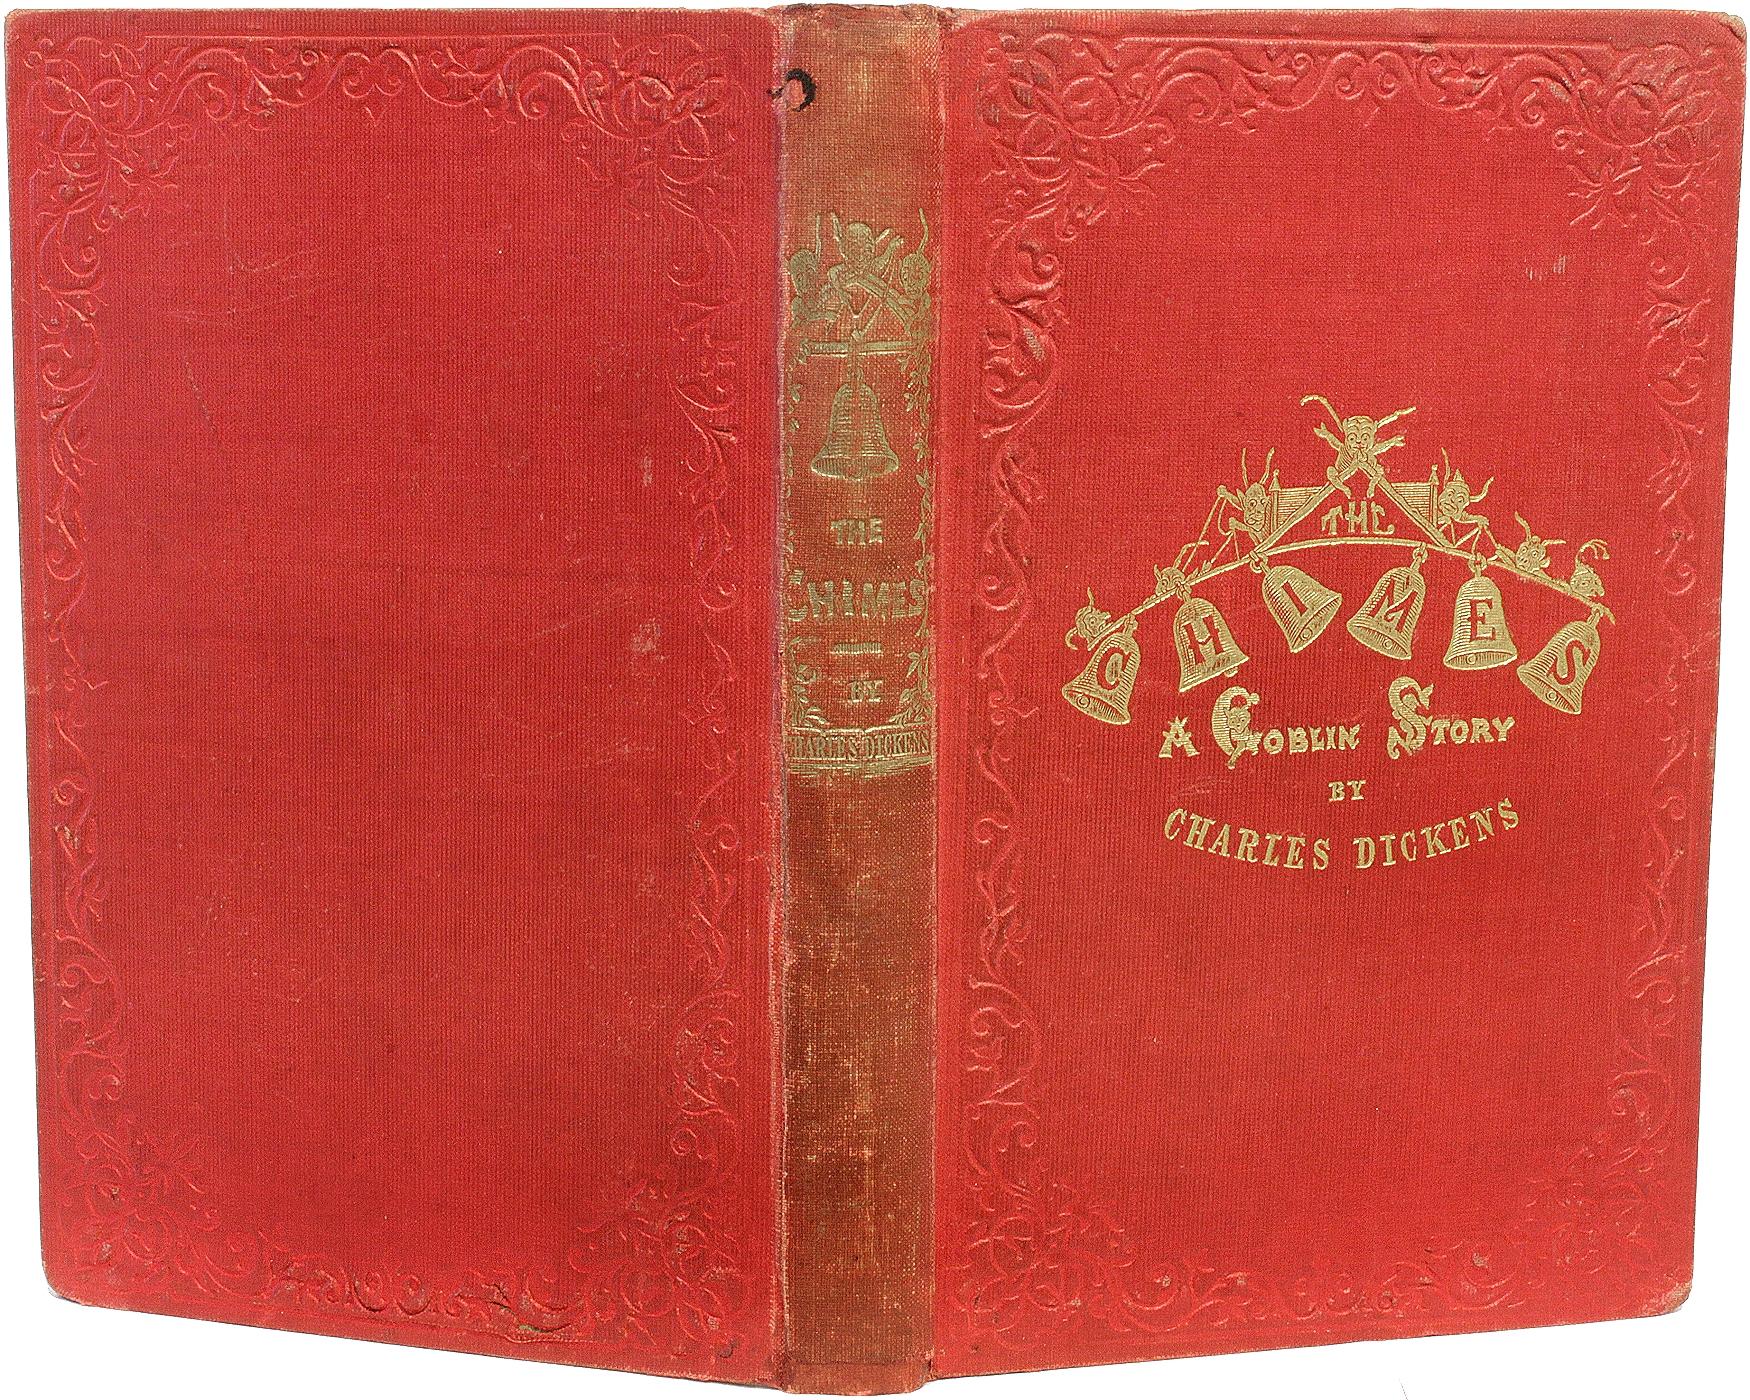 AUTHOR: DICKENS, Charles. 

TITLE: The Chimes: A Goblin Story Of Some Bells That Rang An Old Year Out And A New Year In.

PUBLISHER: London: Chapman & Hall, 1845.

DESCRIPTION: FIRST EDITION SECOND STATE. 1 vol., illustrated, second state of the